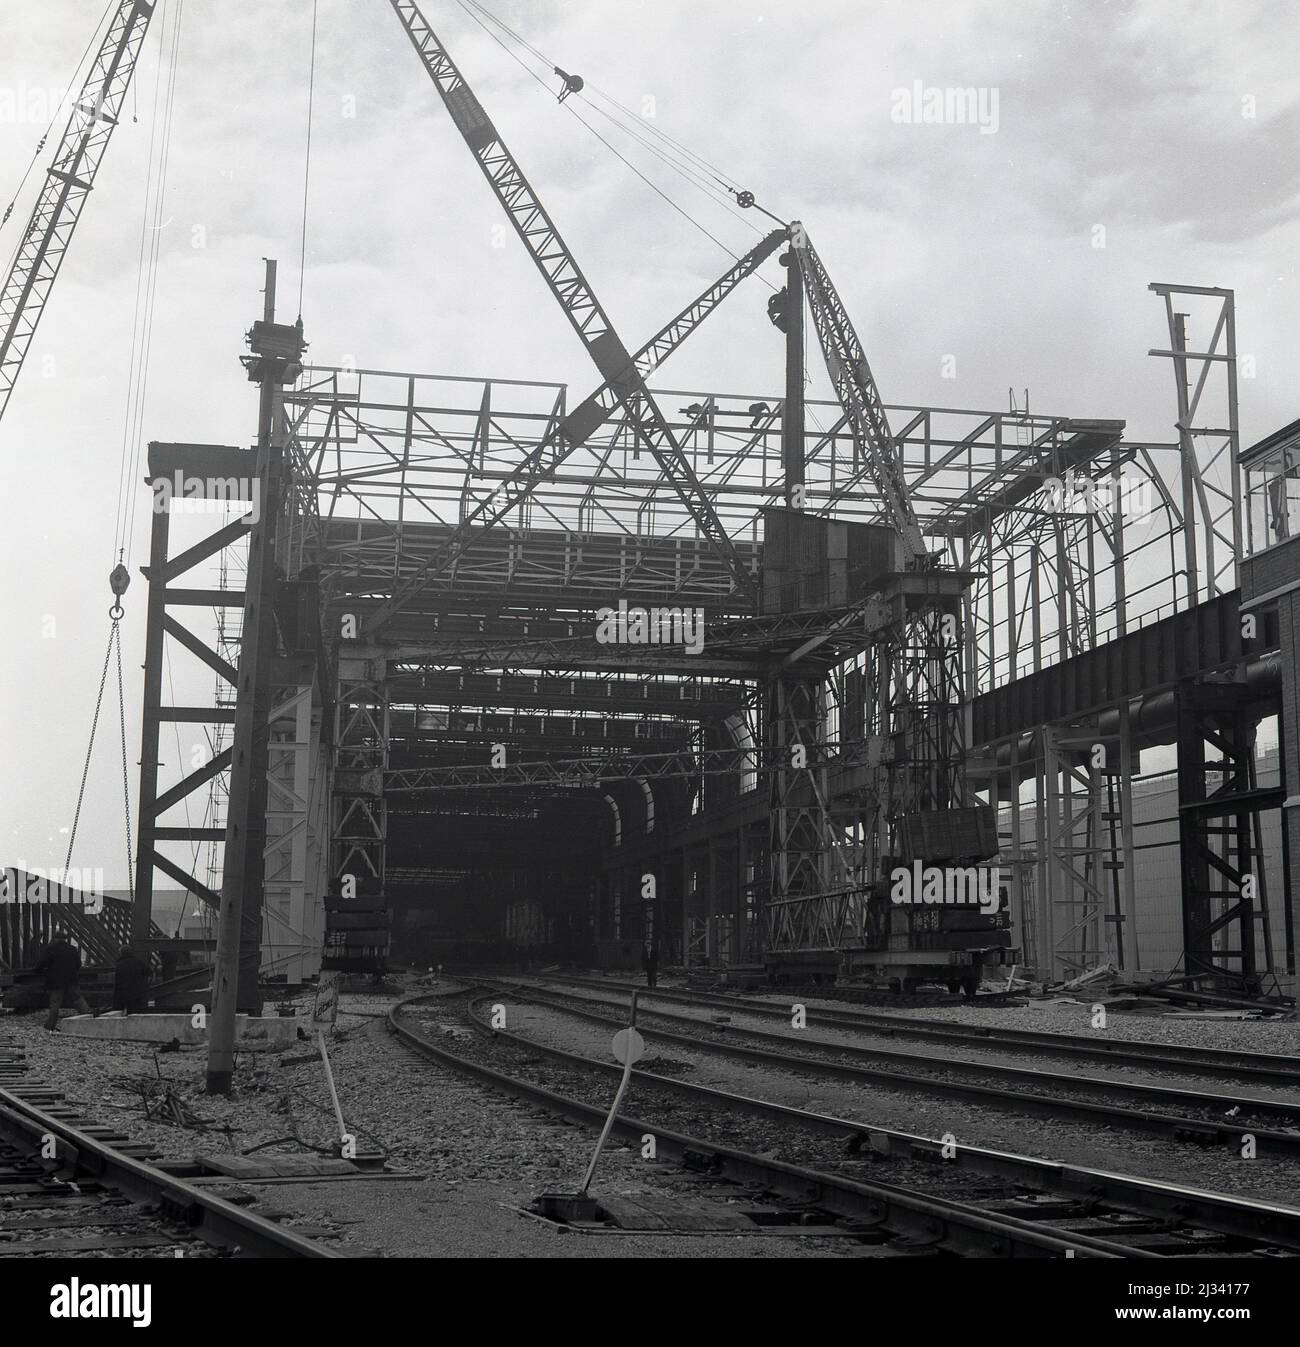 1950s, historical, large cranes and a giant gantry covering the railway tracks at the Abbey Works steel plant, Port Talbot, Wales, UK. Gantries are used in large industrial places for loading heavy bulk materials. Stock Photo